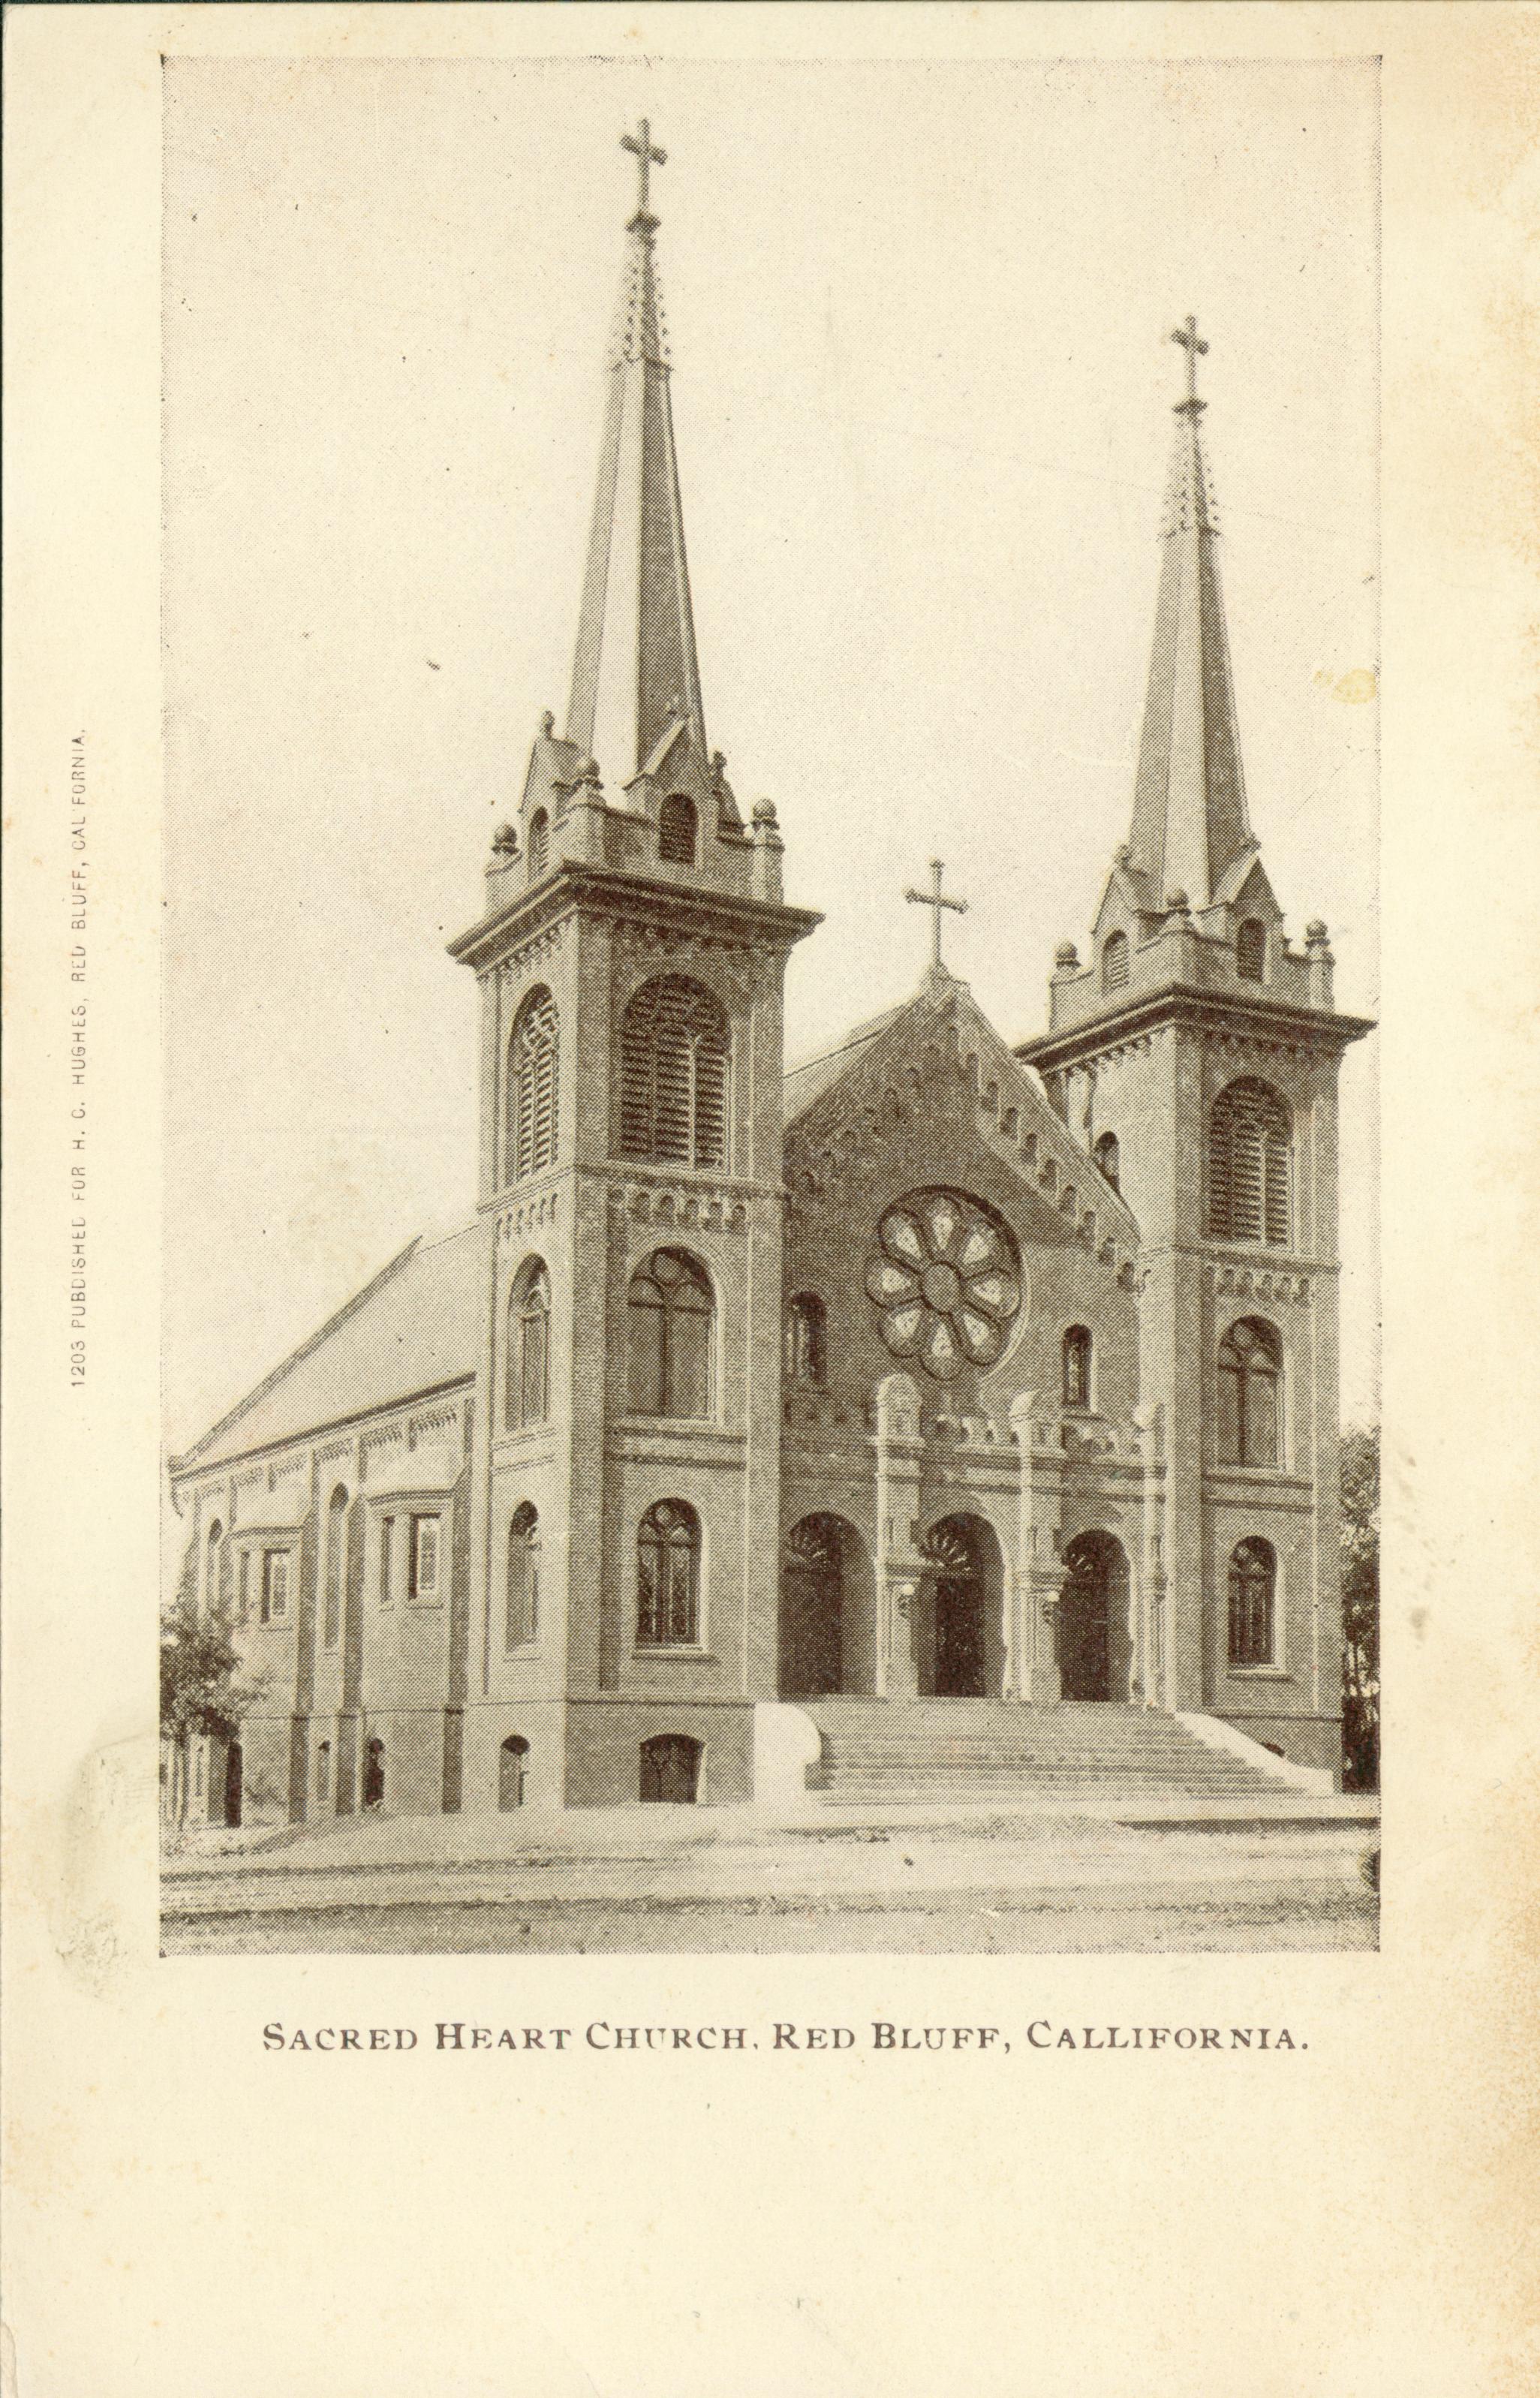 Shows a corner-view of the Sacred Heart Church in Red Bluff